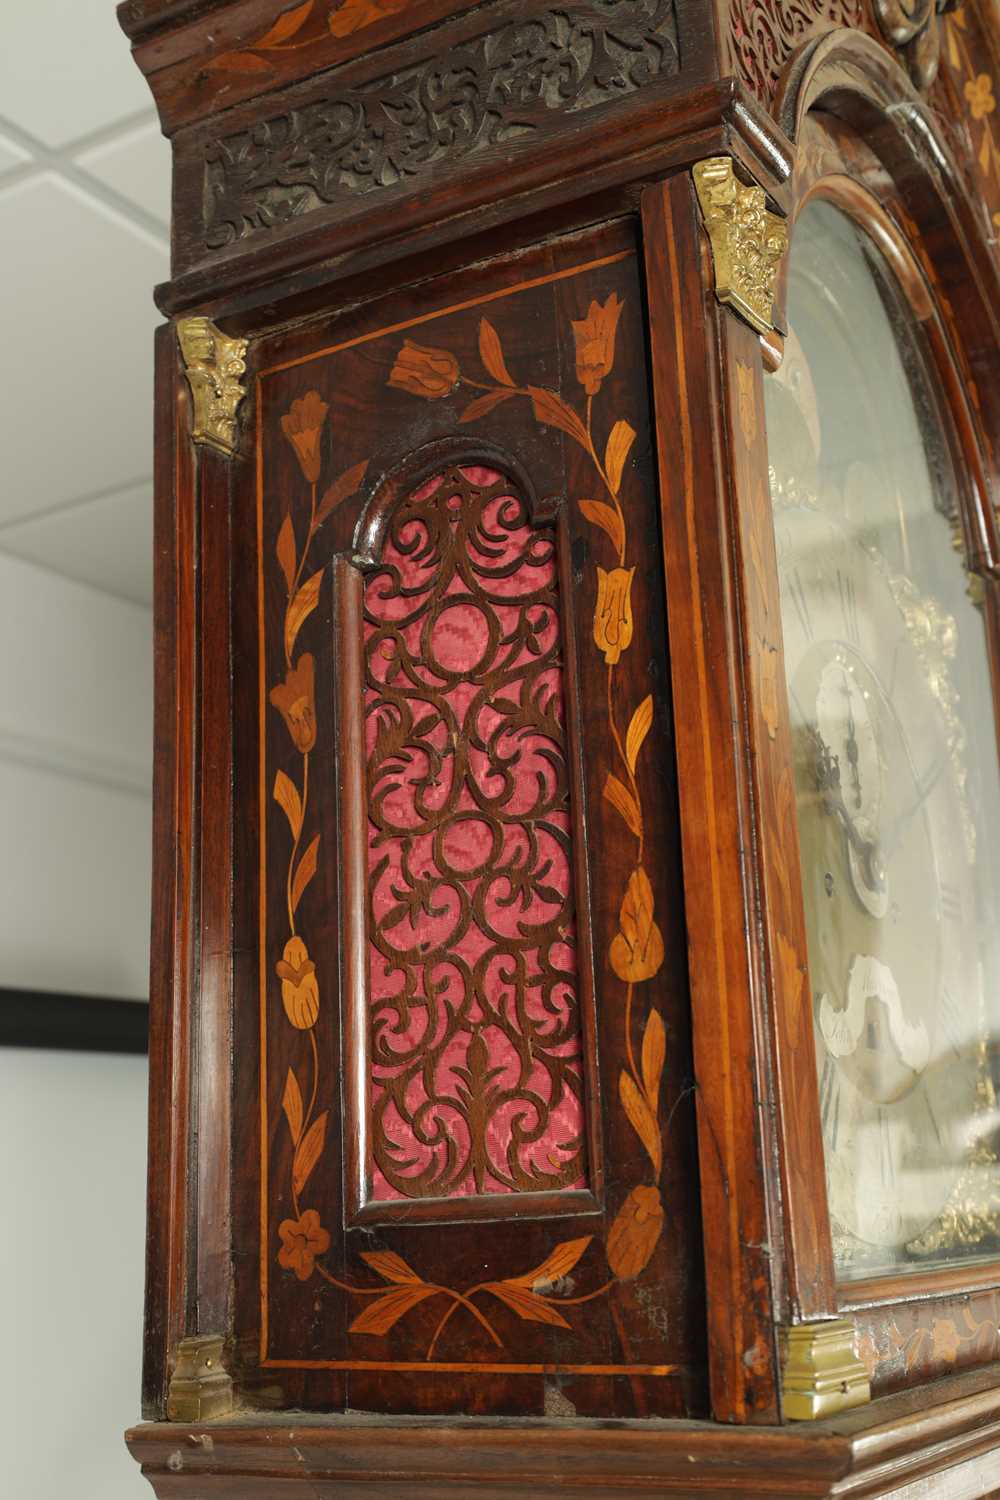 JOHN MARRIOTT, LONDON. A FINE 18TH CENTURY WALNUT AND DUTCH MARQUETRY 8-DAY LONG CASE CLOCK - Image 10 of 13